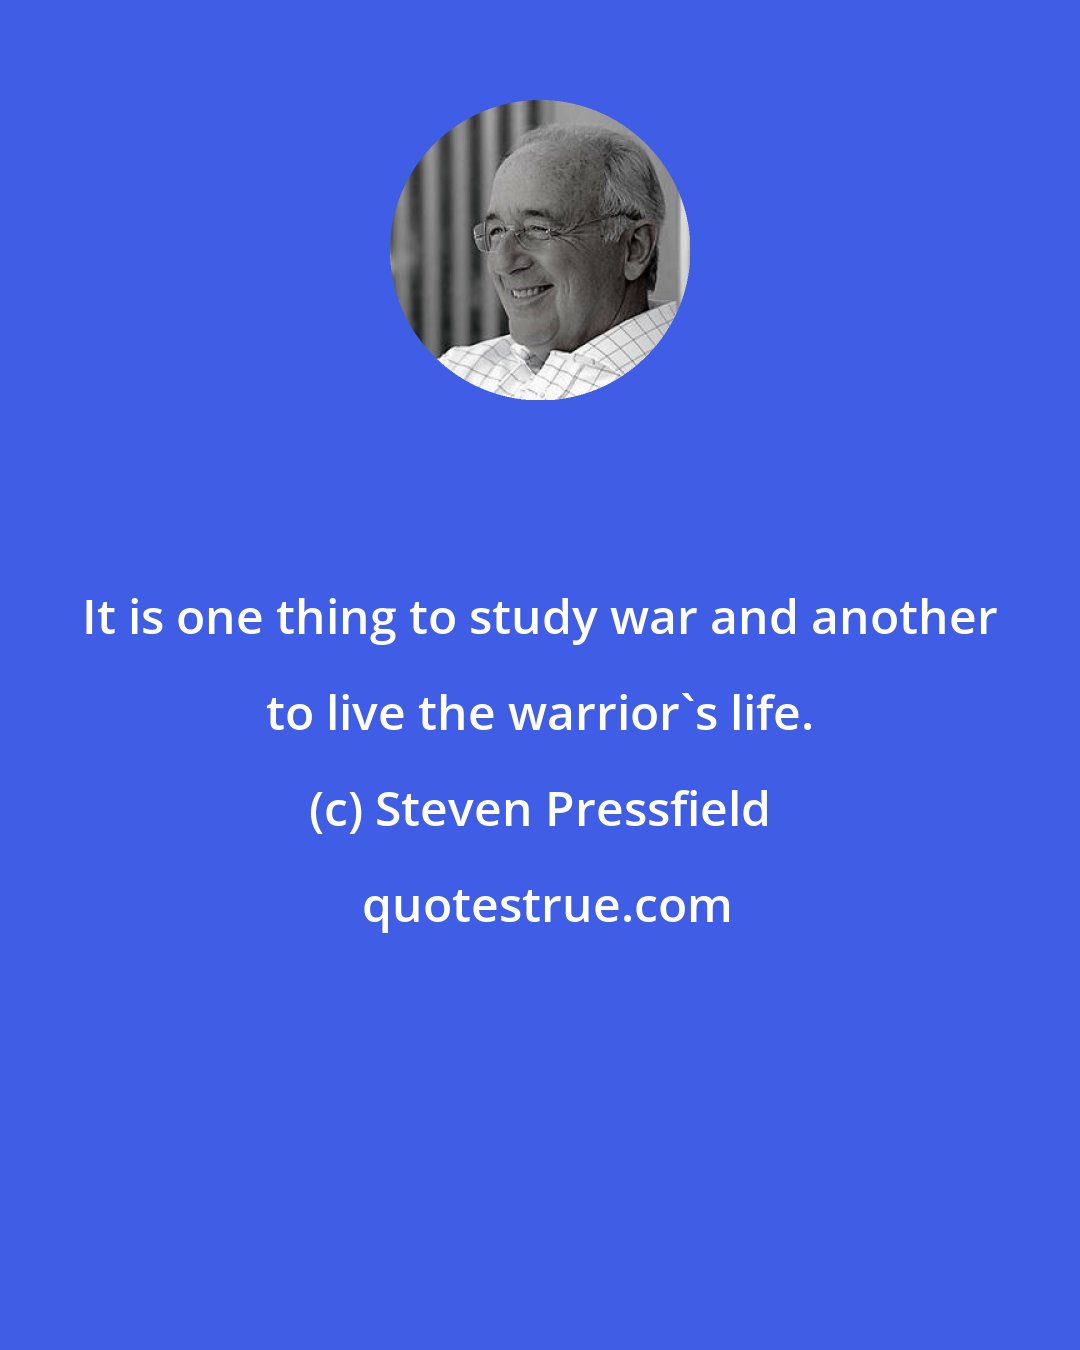 Steven Pressfield: It is one thing to study war and another to live the warrior's life.